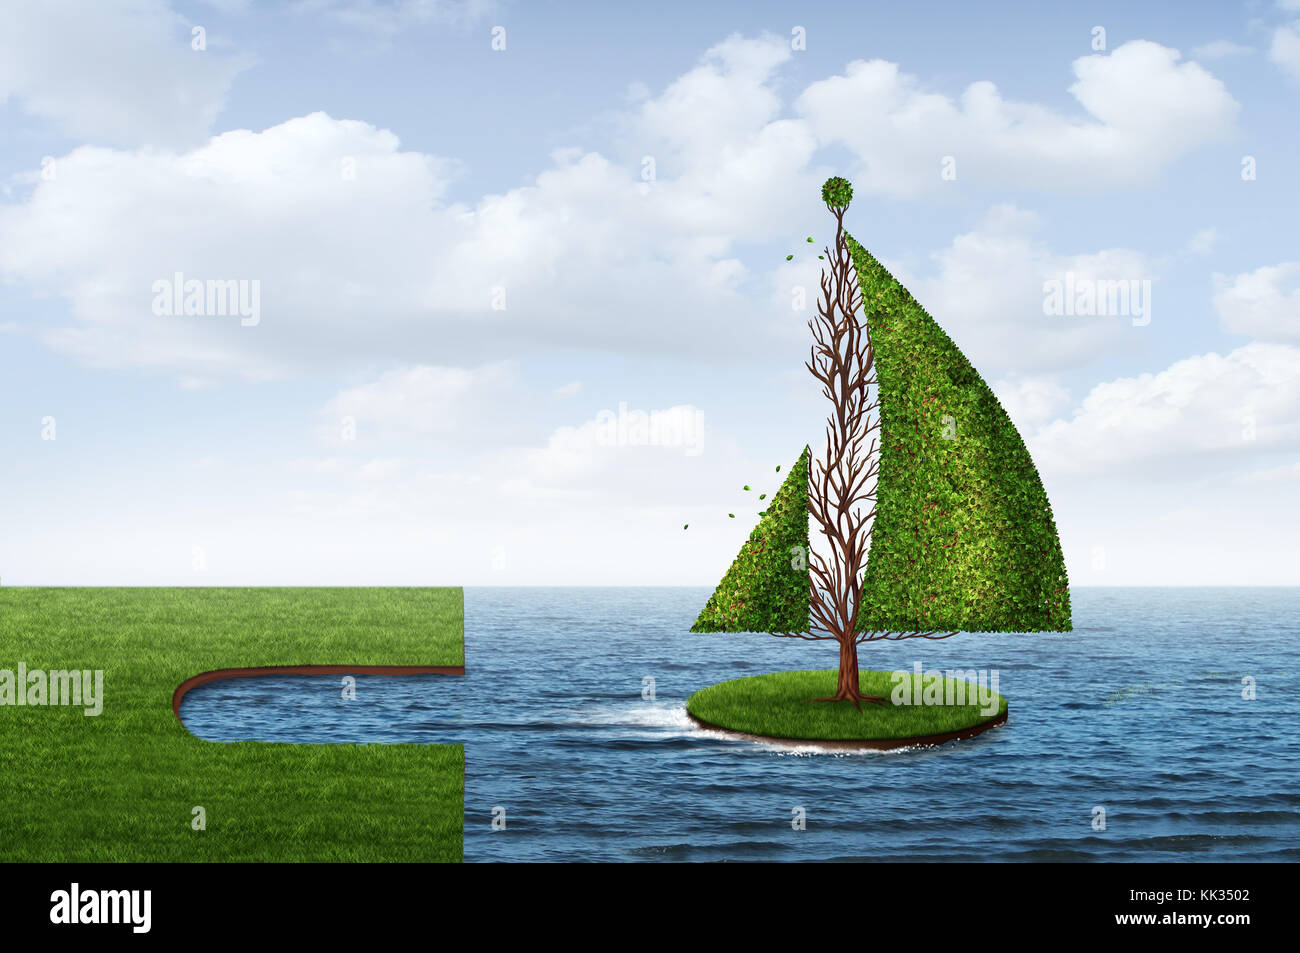 Explore opportunity business venture concept as a tree shaped as a boat as a metaphor to set sail towards success with 3D render elements. Stock Photo